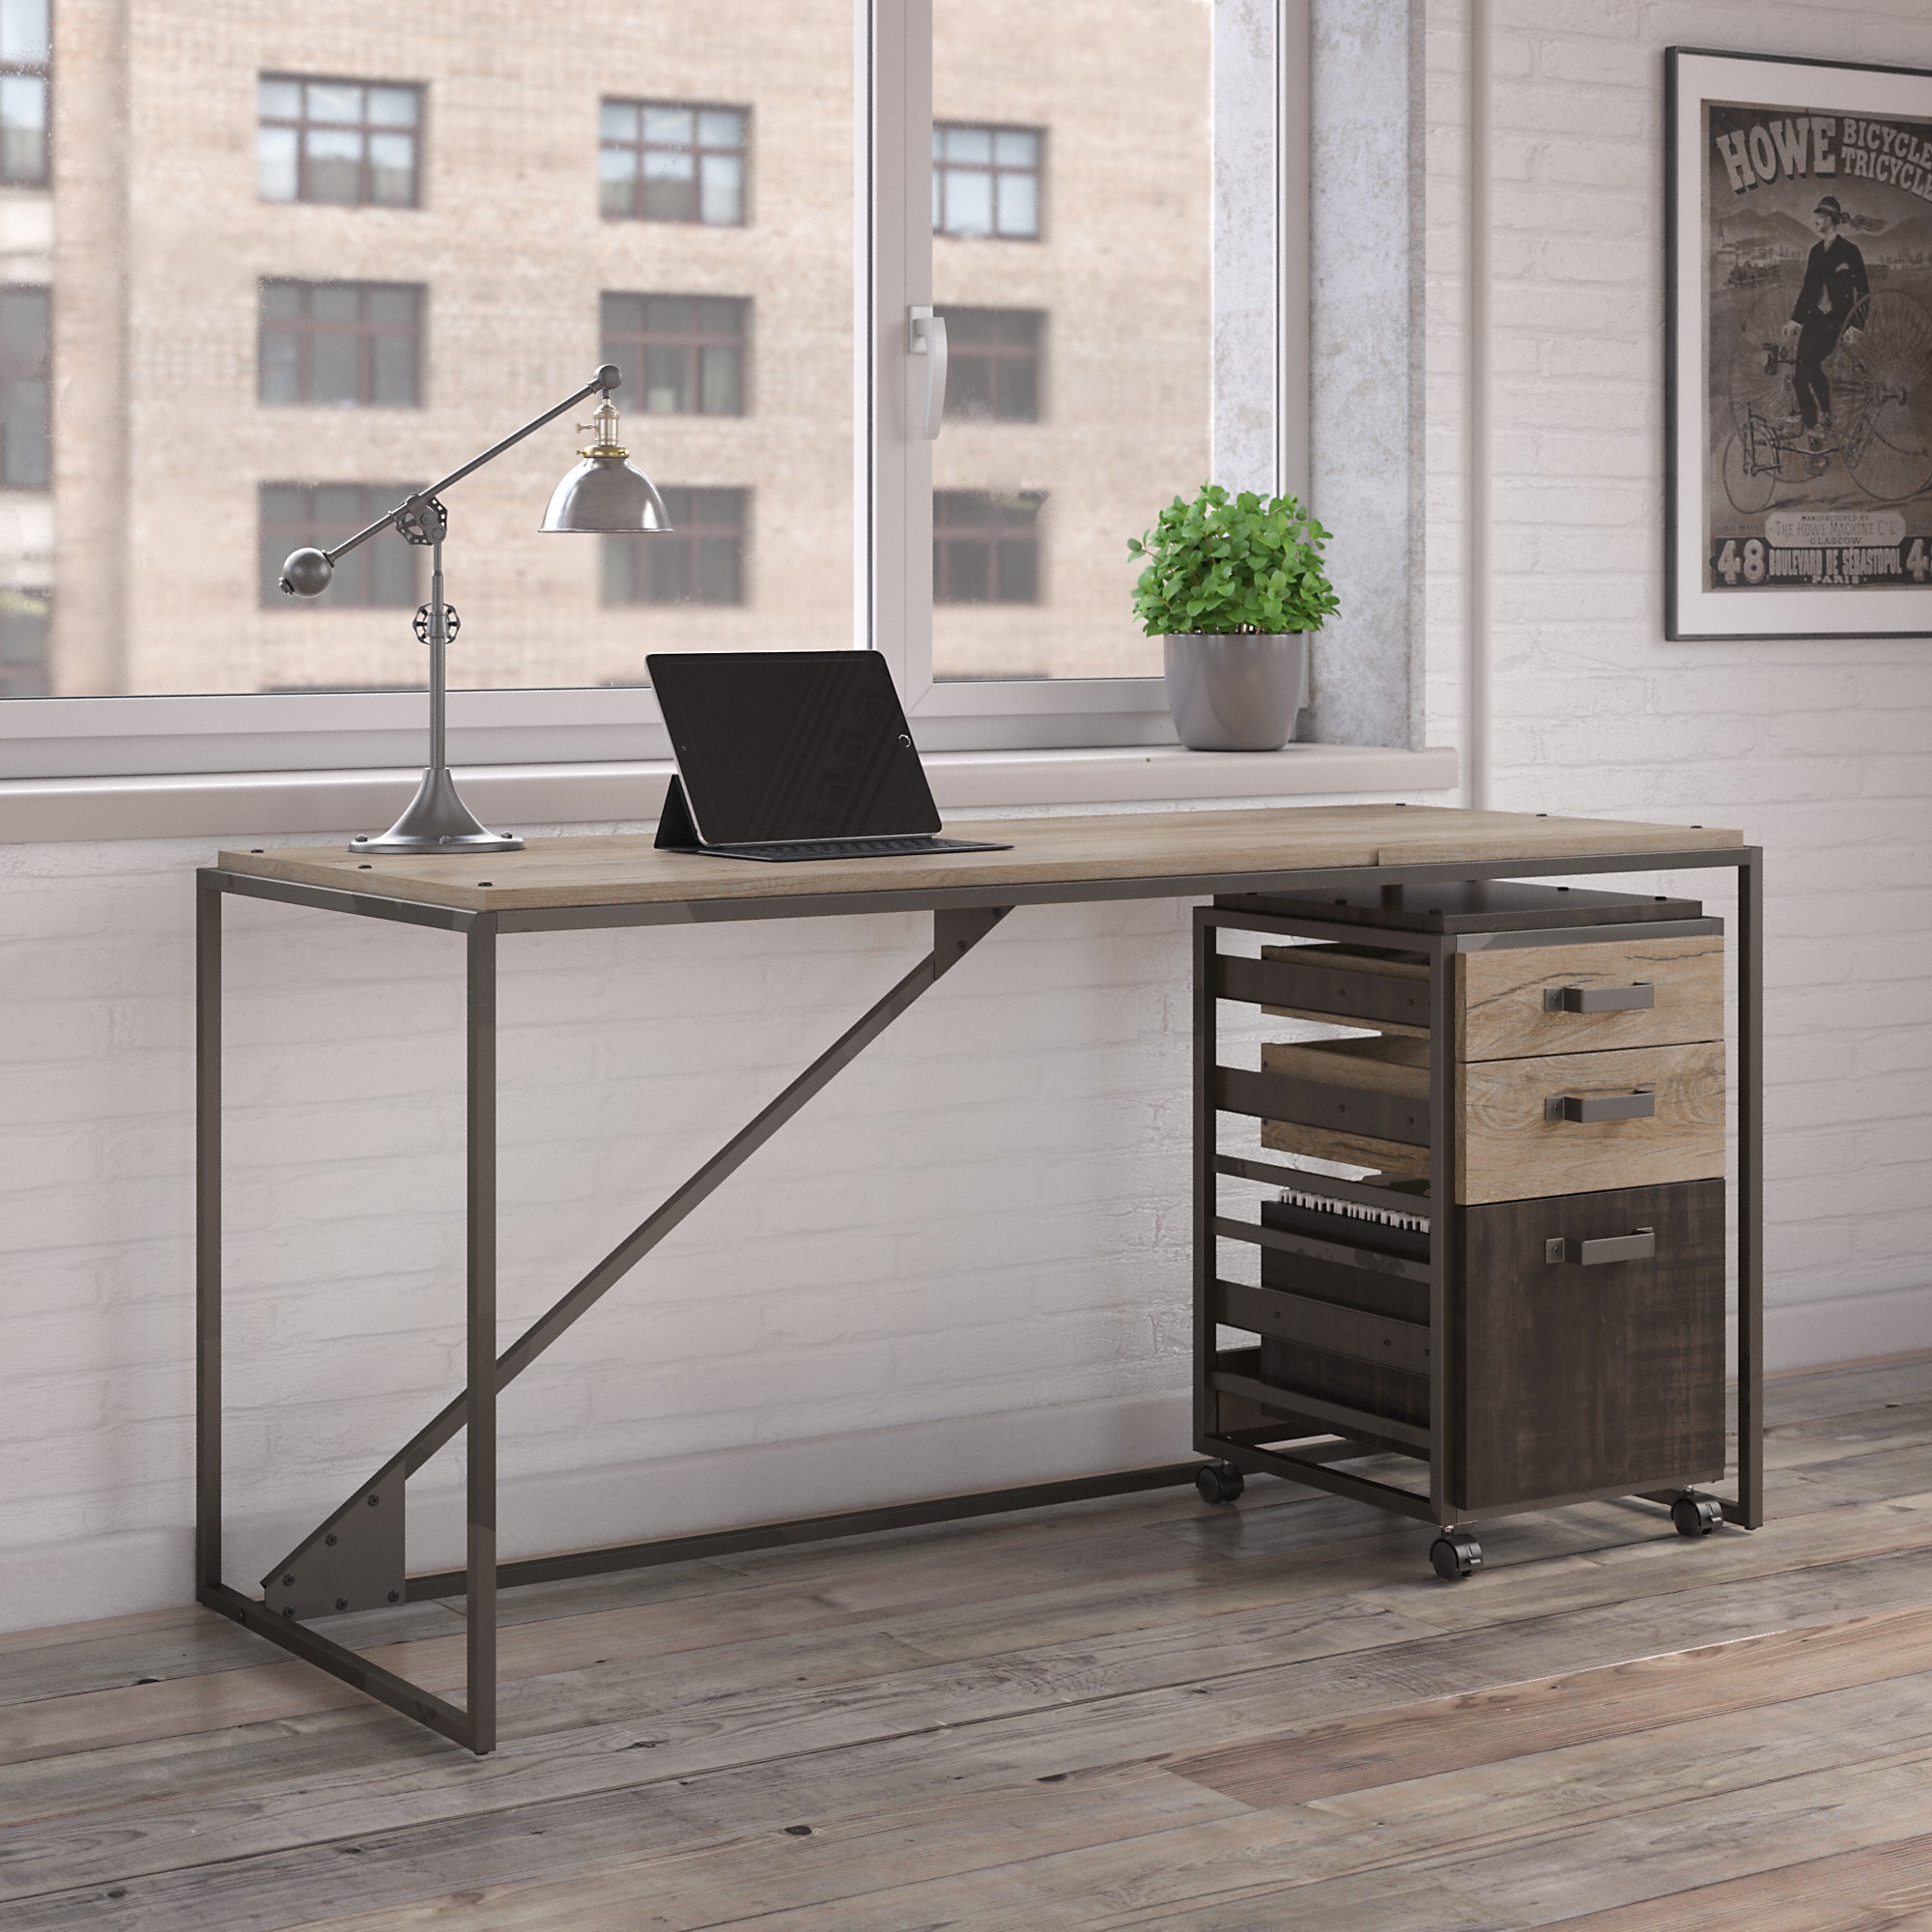 Bush Furniture Refinery 62" Industrial Writing Desk with Mobile File Cabinet - image 1 of 7